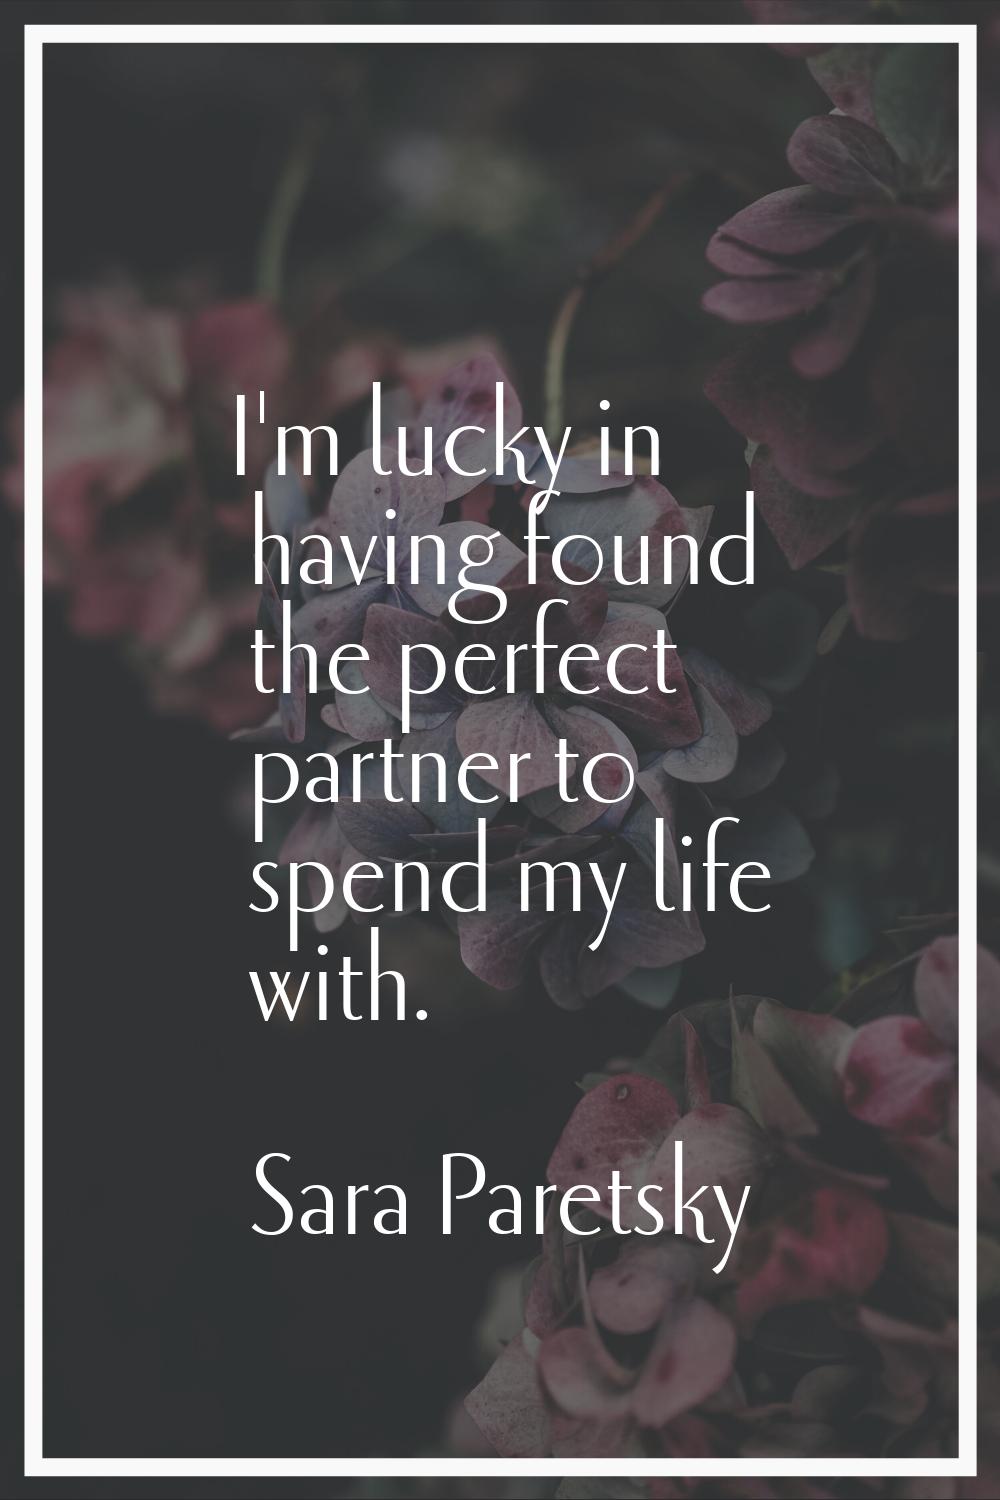 I'm lucky in having found the perfect partner to spend my life with.